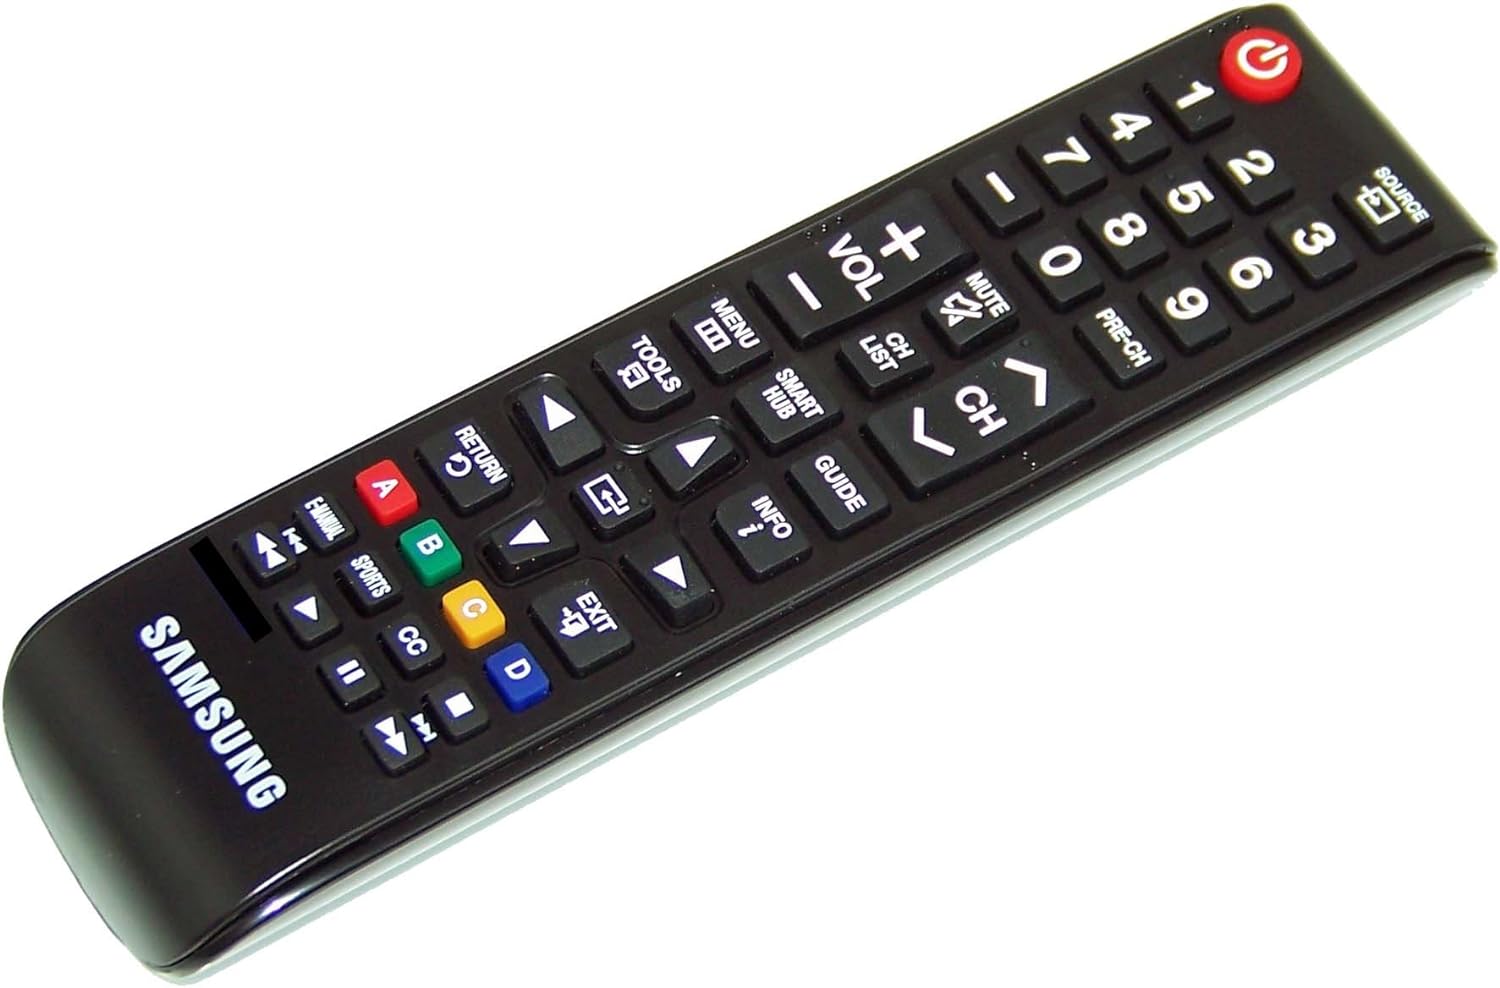 Remote control pointing at a Samsung TV